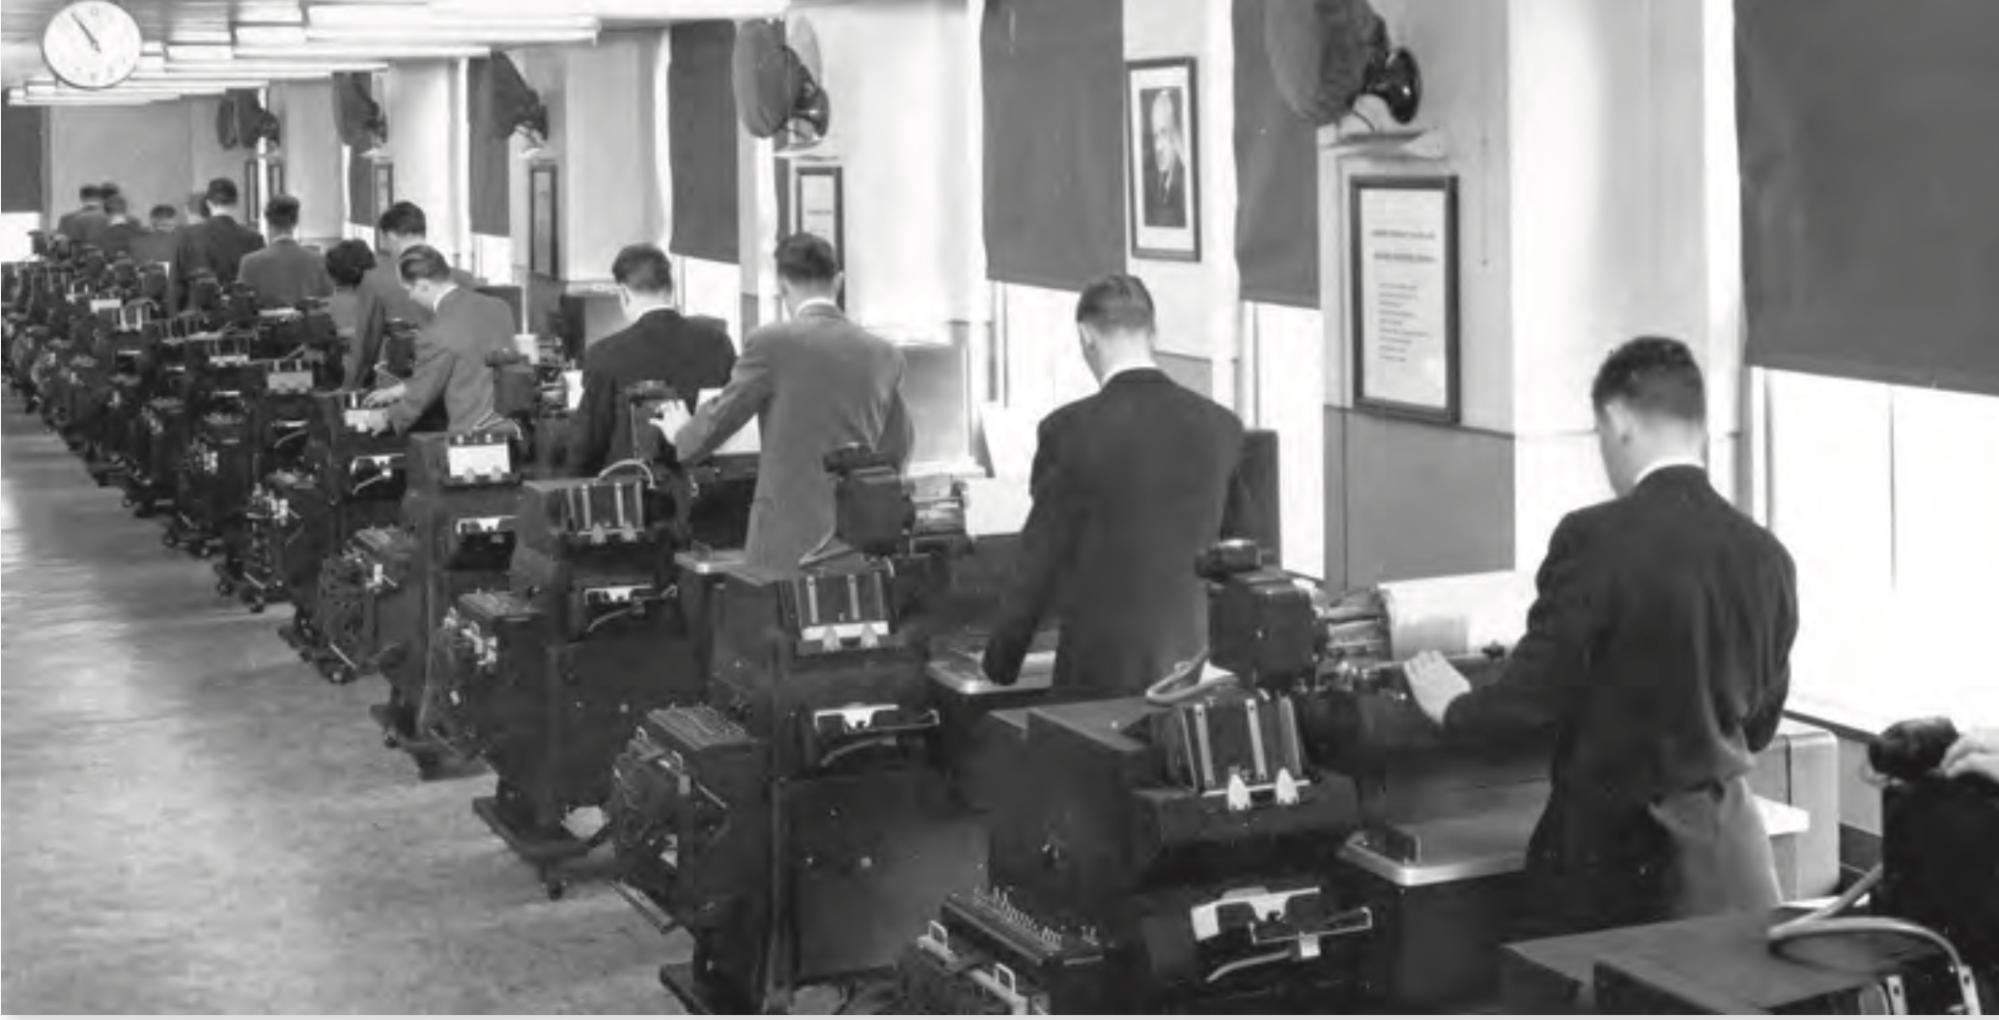 Black-and-white photograph depicting a row of suit-wearing men standing in front of their desks, operating old computer equipment.